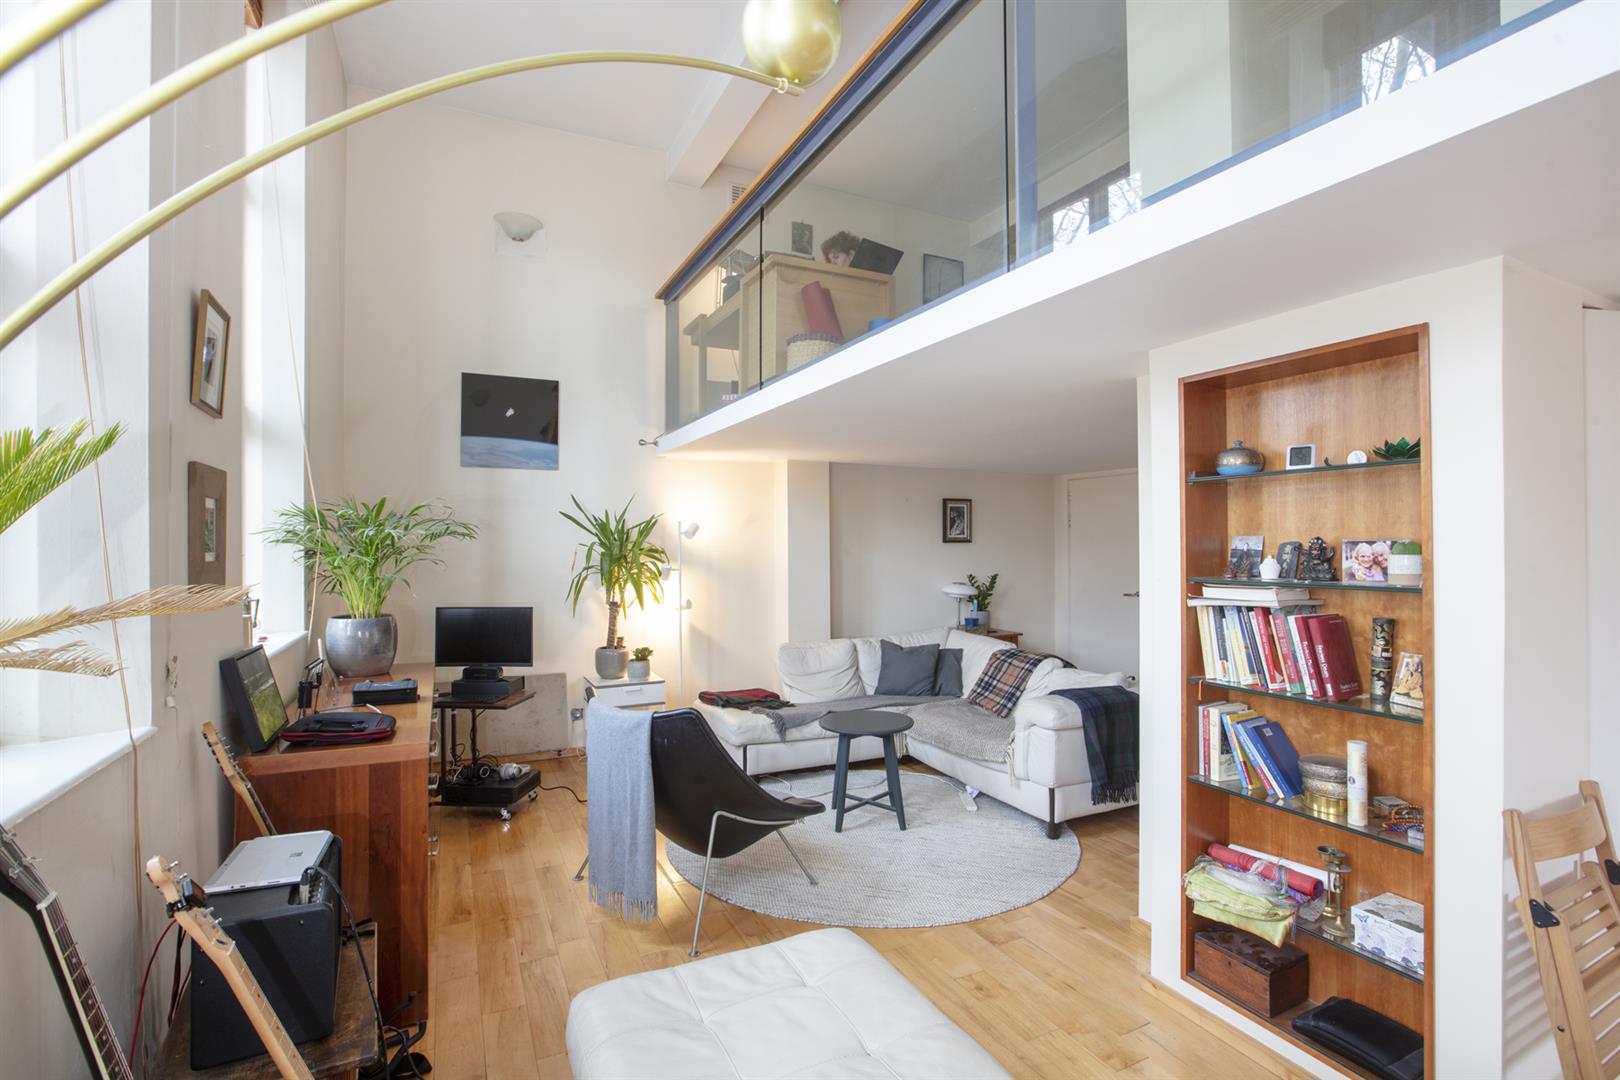 Flat - Conversion For Sale in Cormont Road, Camberwell, SE5 924 view1